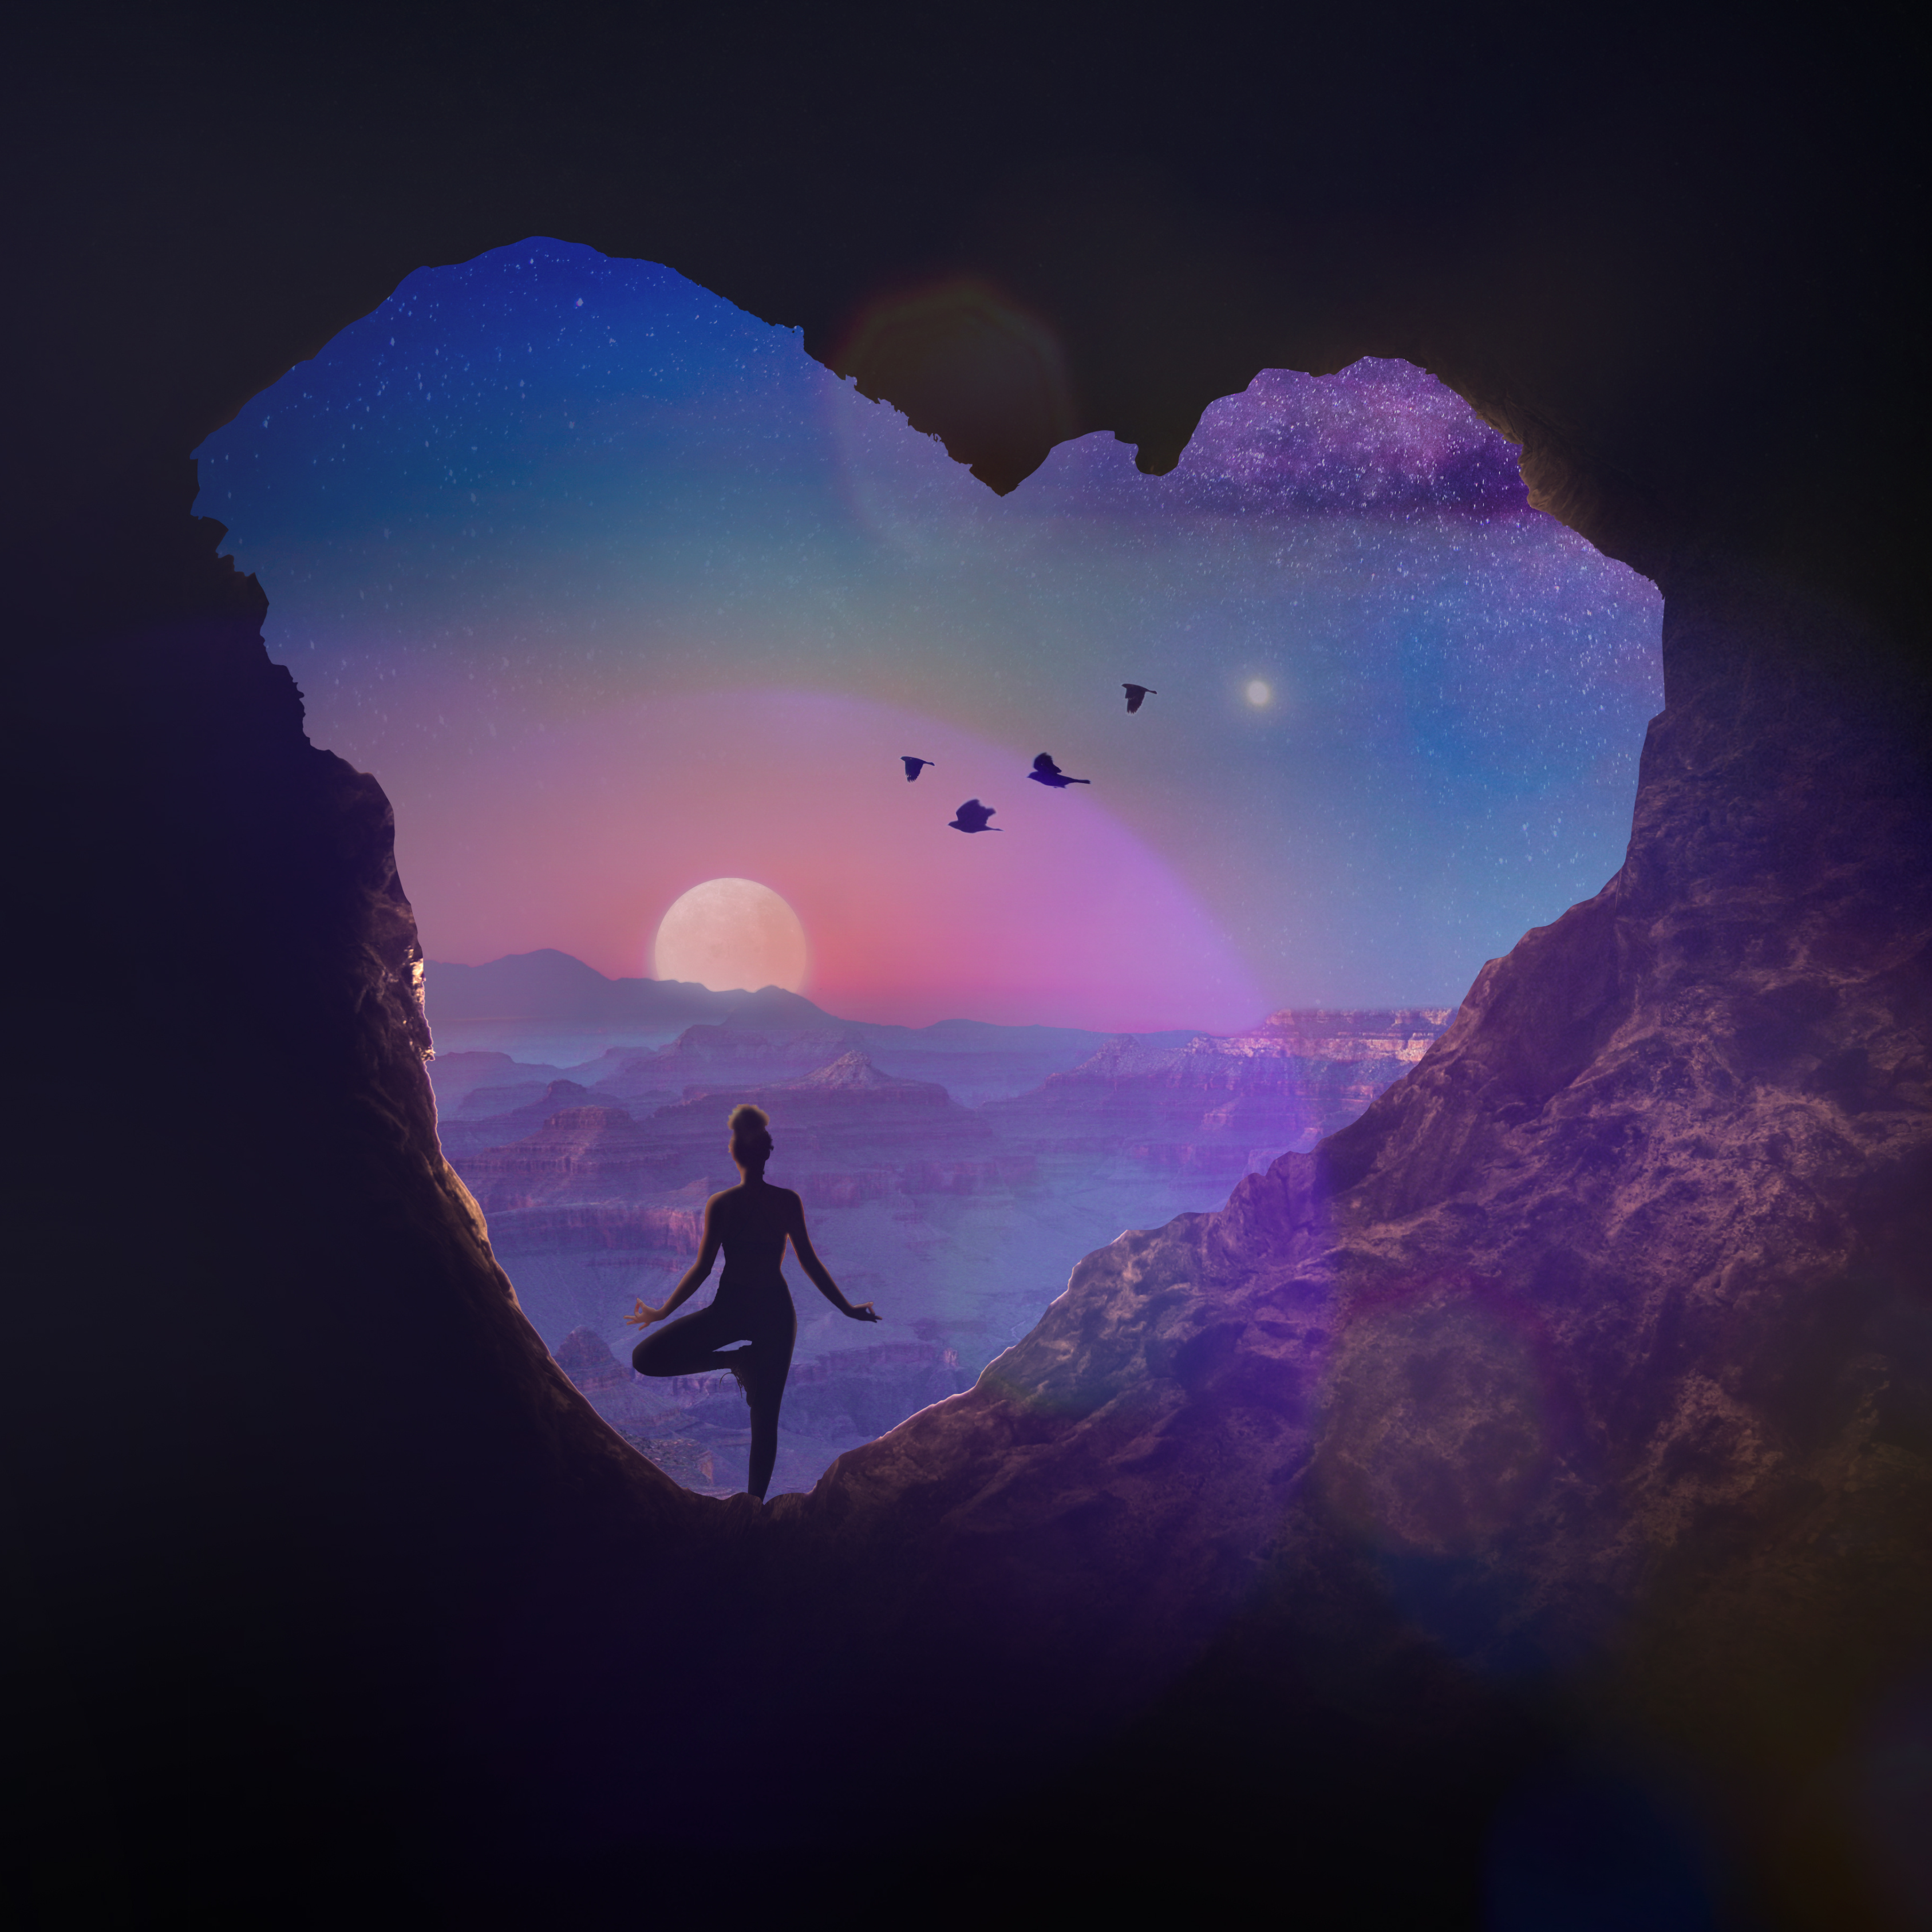 Image: a silhouette of woman in a standing yoga pose against the backdrop of a sunset framed by what appears to be a heart-shaped opening of a rock cave